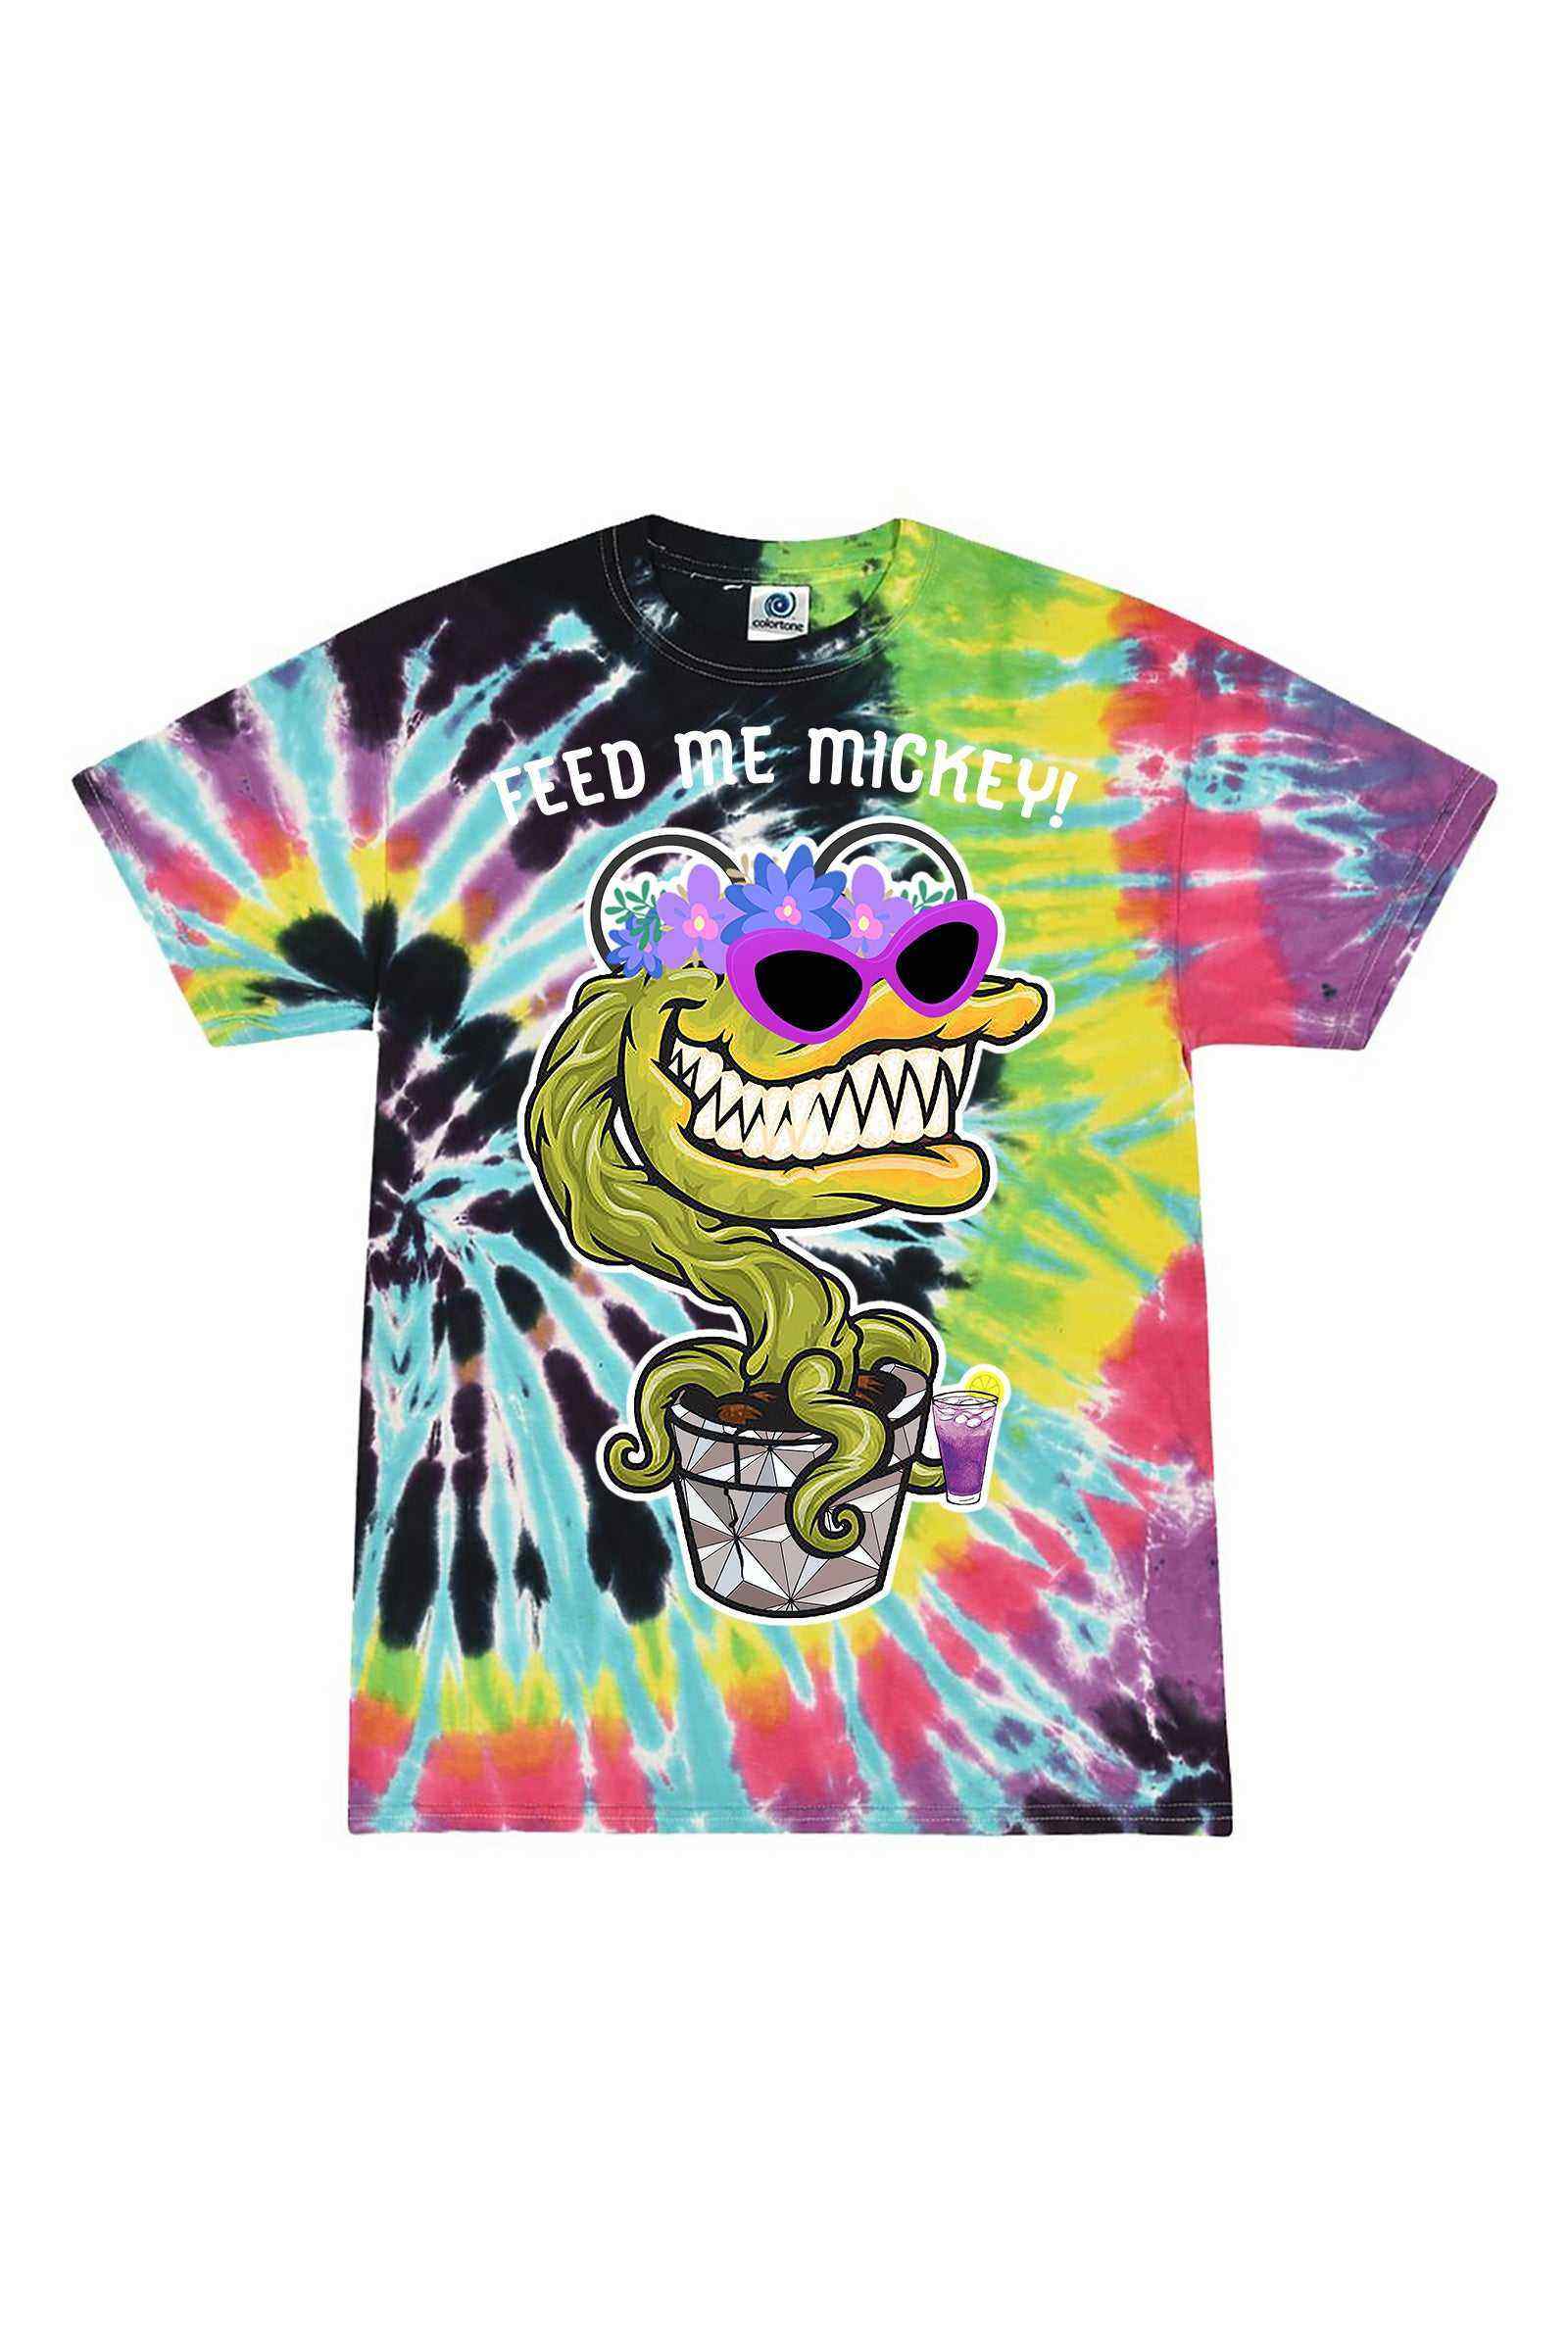 Feed Me Mickey Tie-Dye | Little Shop Of Horrors Shirt - Dylan's Tees